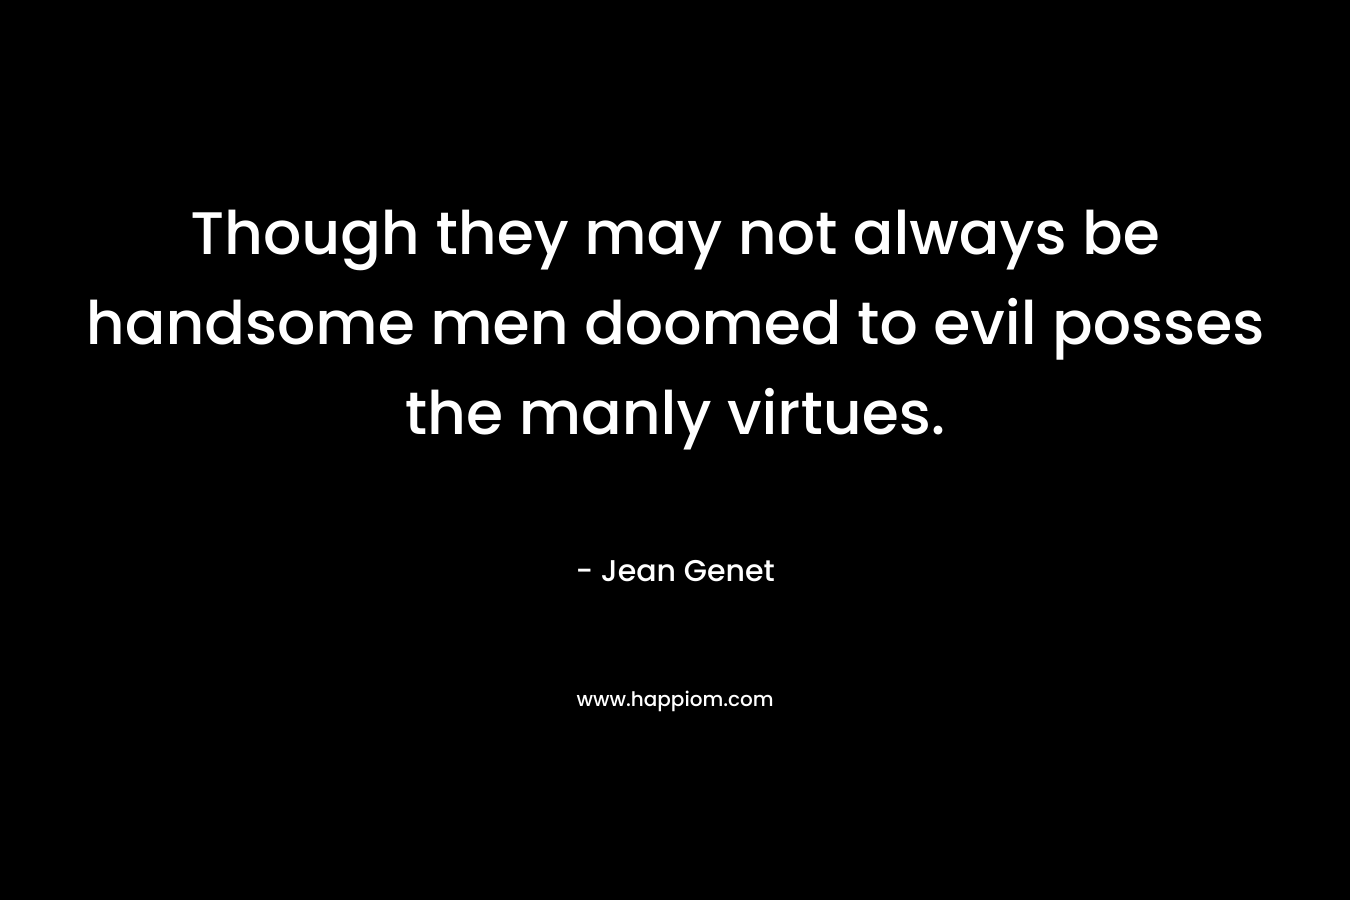 Though they may not always be handsome men doomed to evil posses the manly virtues. – Jean Genet